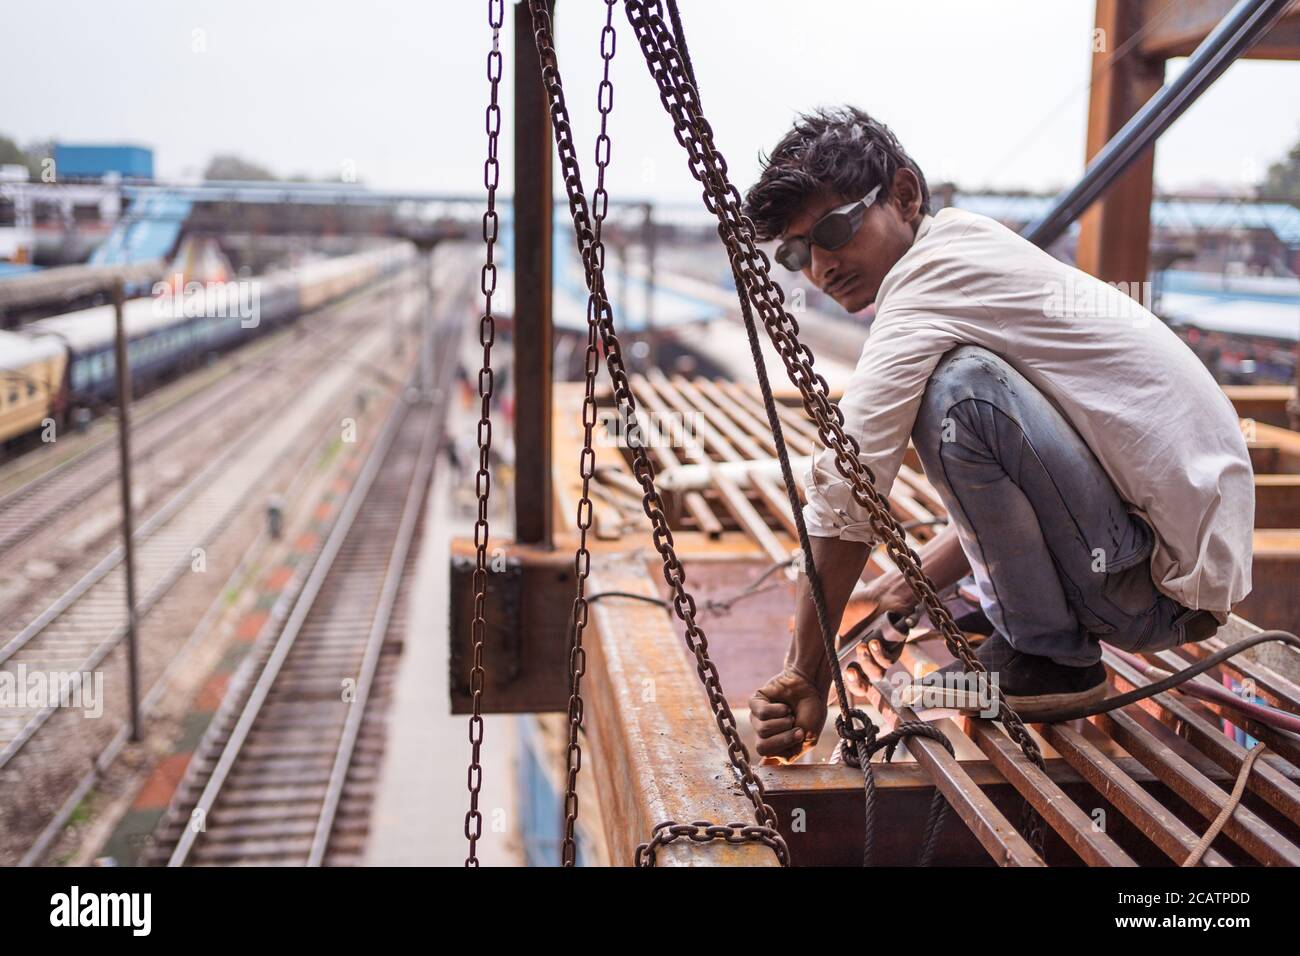 Agra / India - February 22, 2020: indian man welding irons on overpass of train station Stock Photo